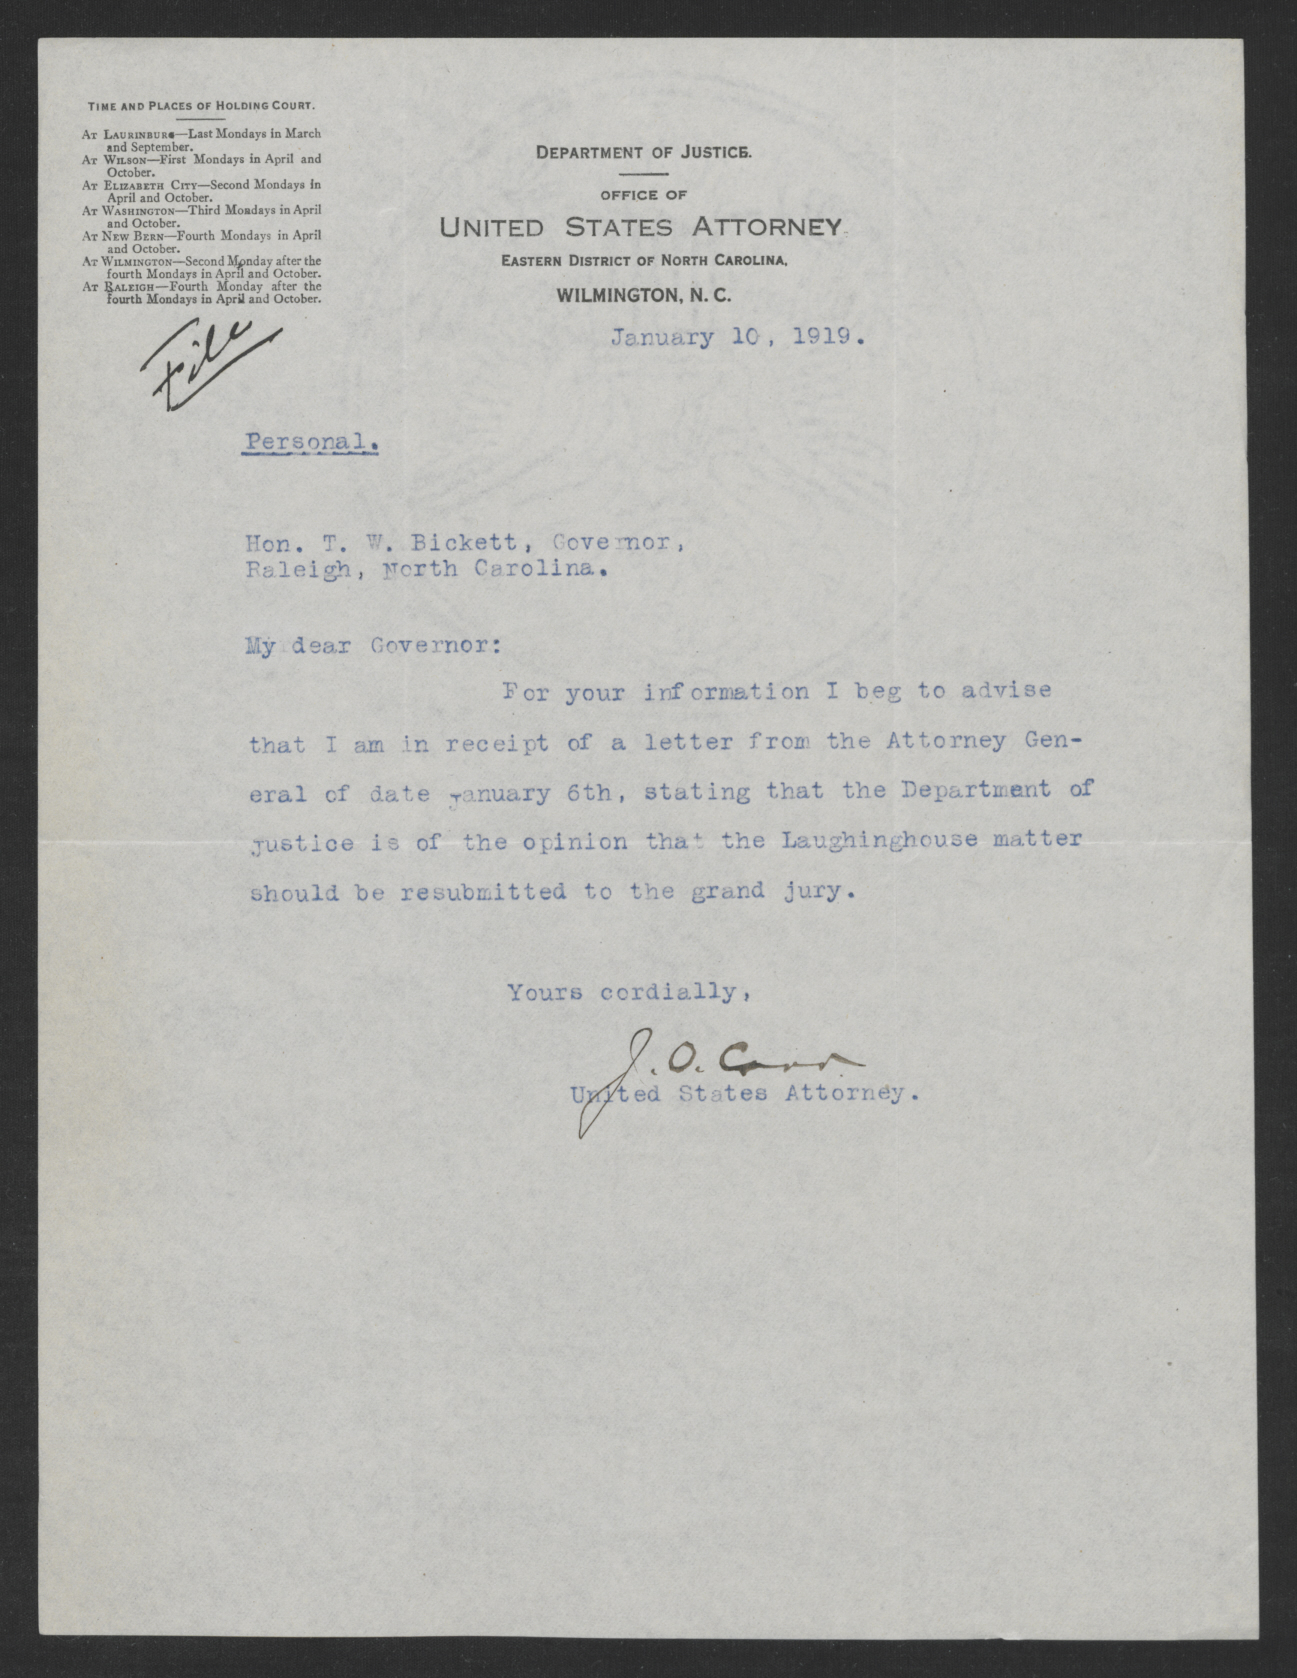 Letter from James O. Carr to Thomas W. Bickett, January 10, 1919